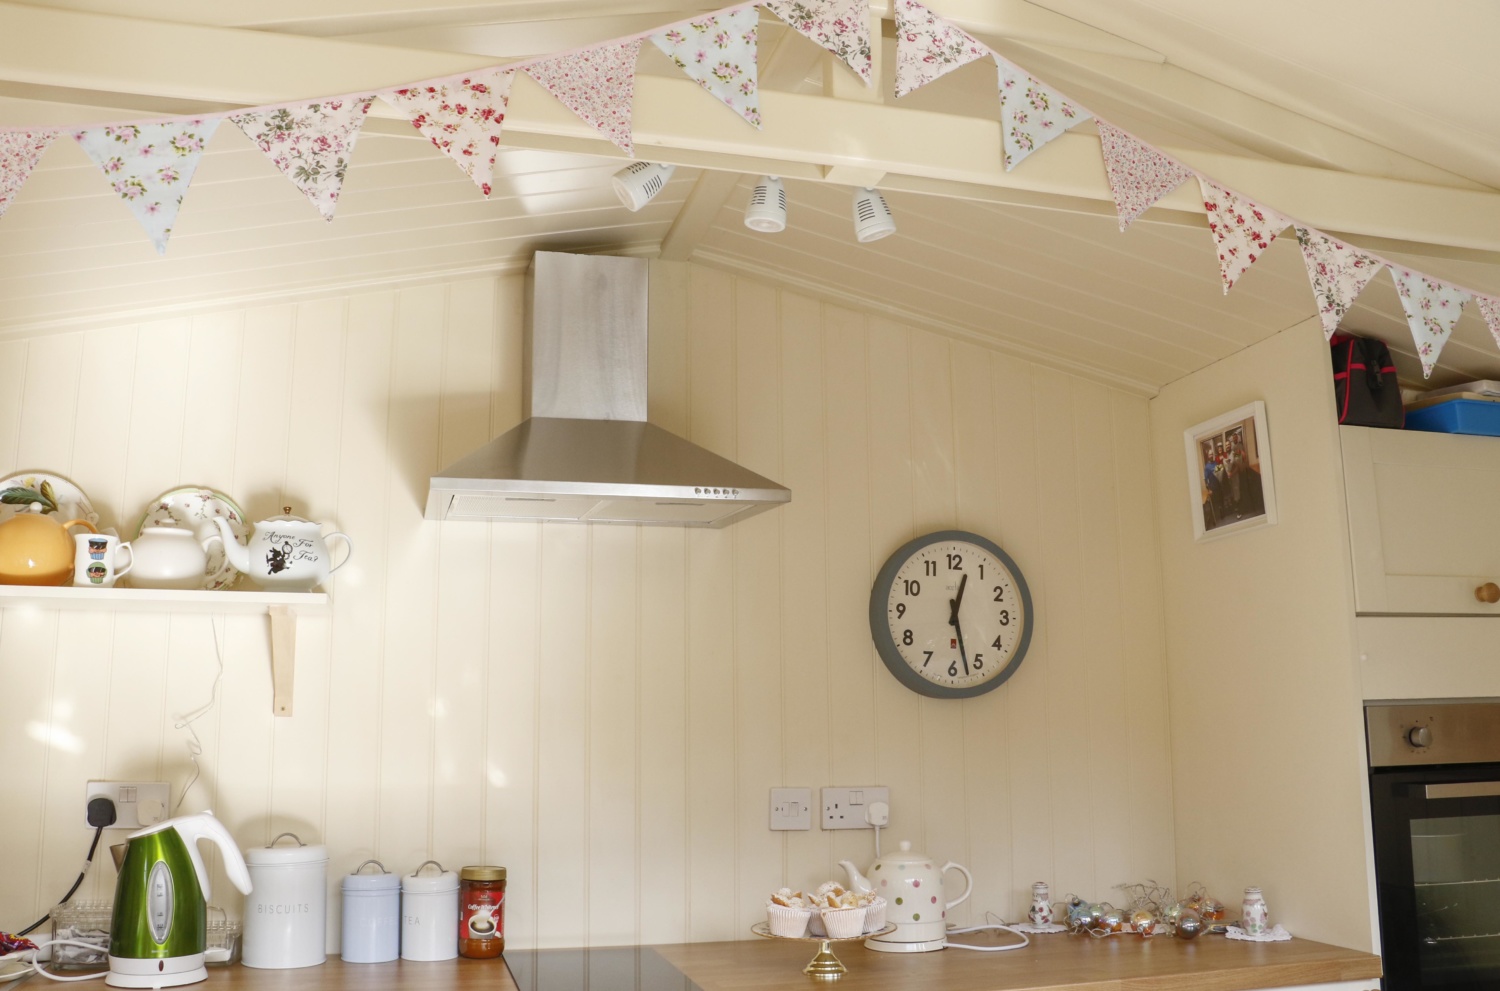 ITV’s Love Your Garden visited Kath Ryan to give her the garden makeover of her dreams! The Studio Apex by Malvern Garden Buildings has a fitted kitchen perfect for Kath to bake for her 'boys'